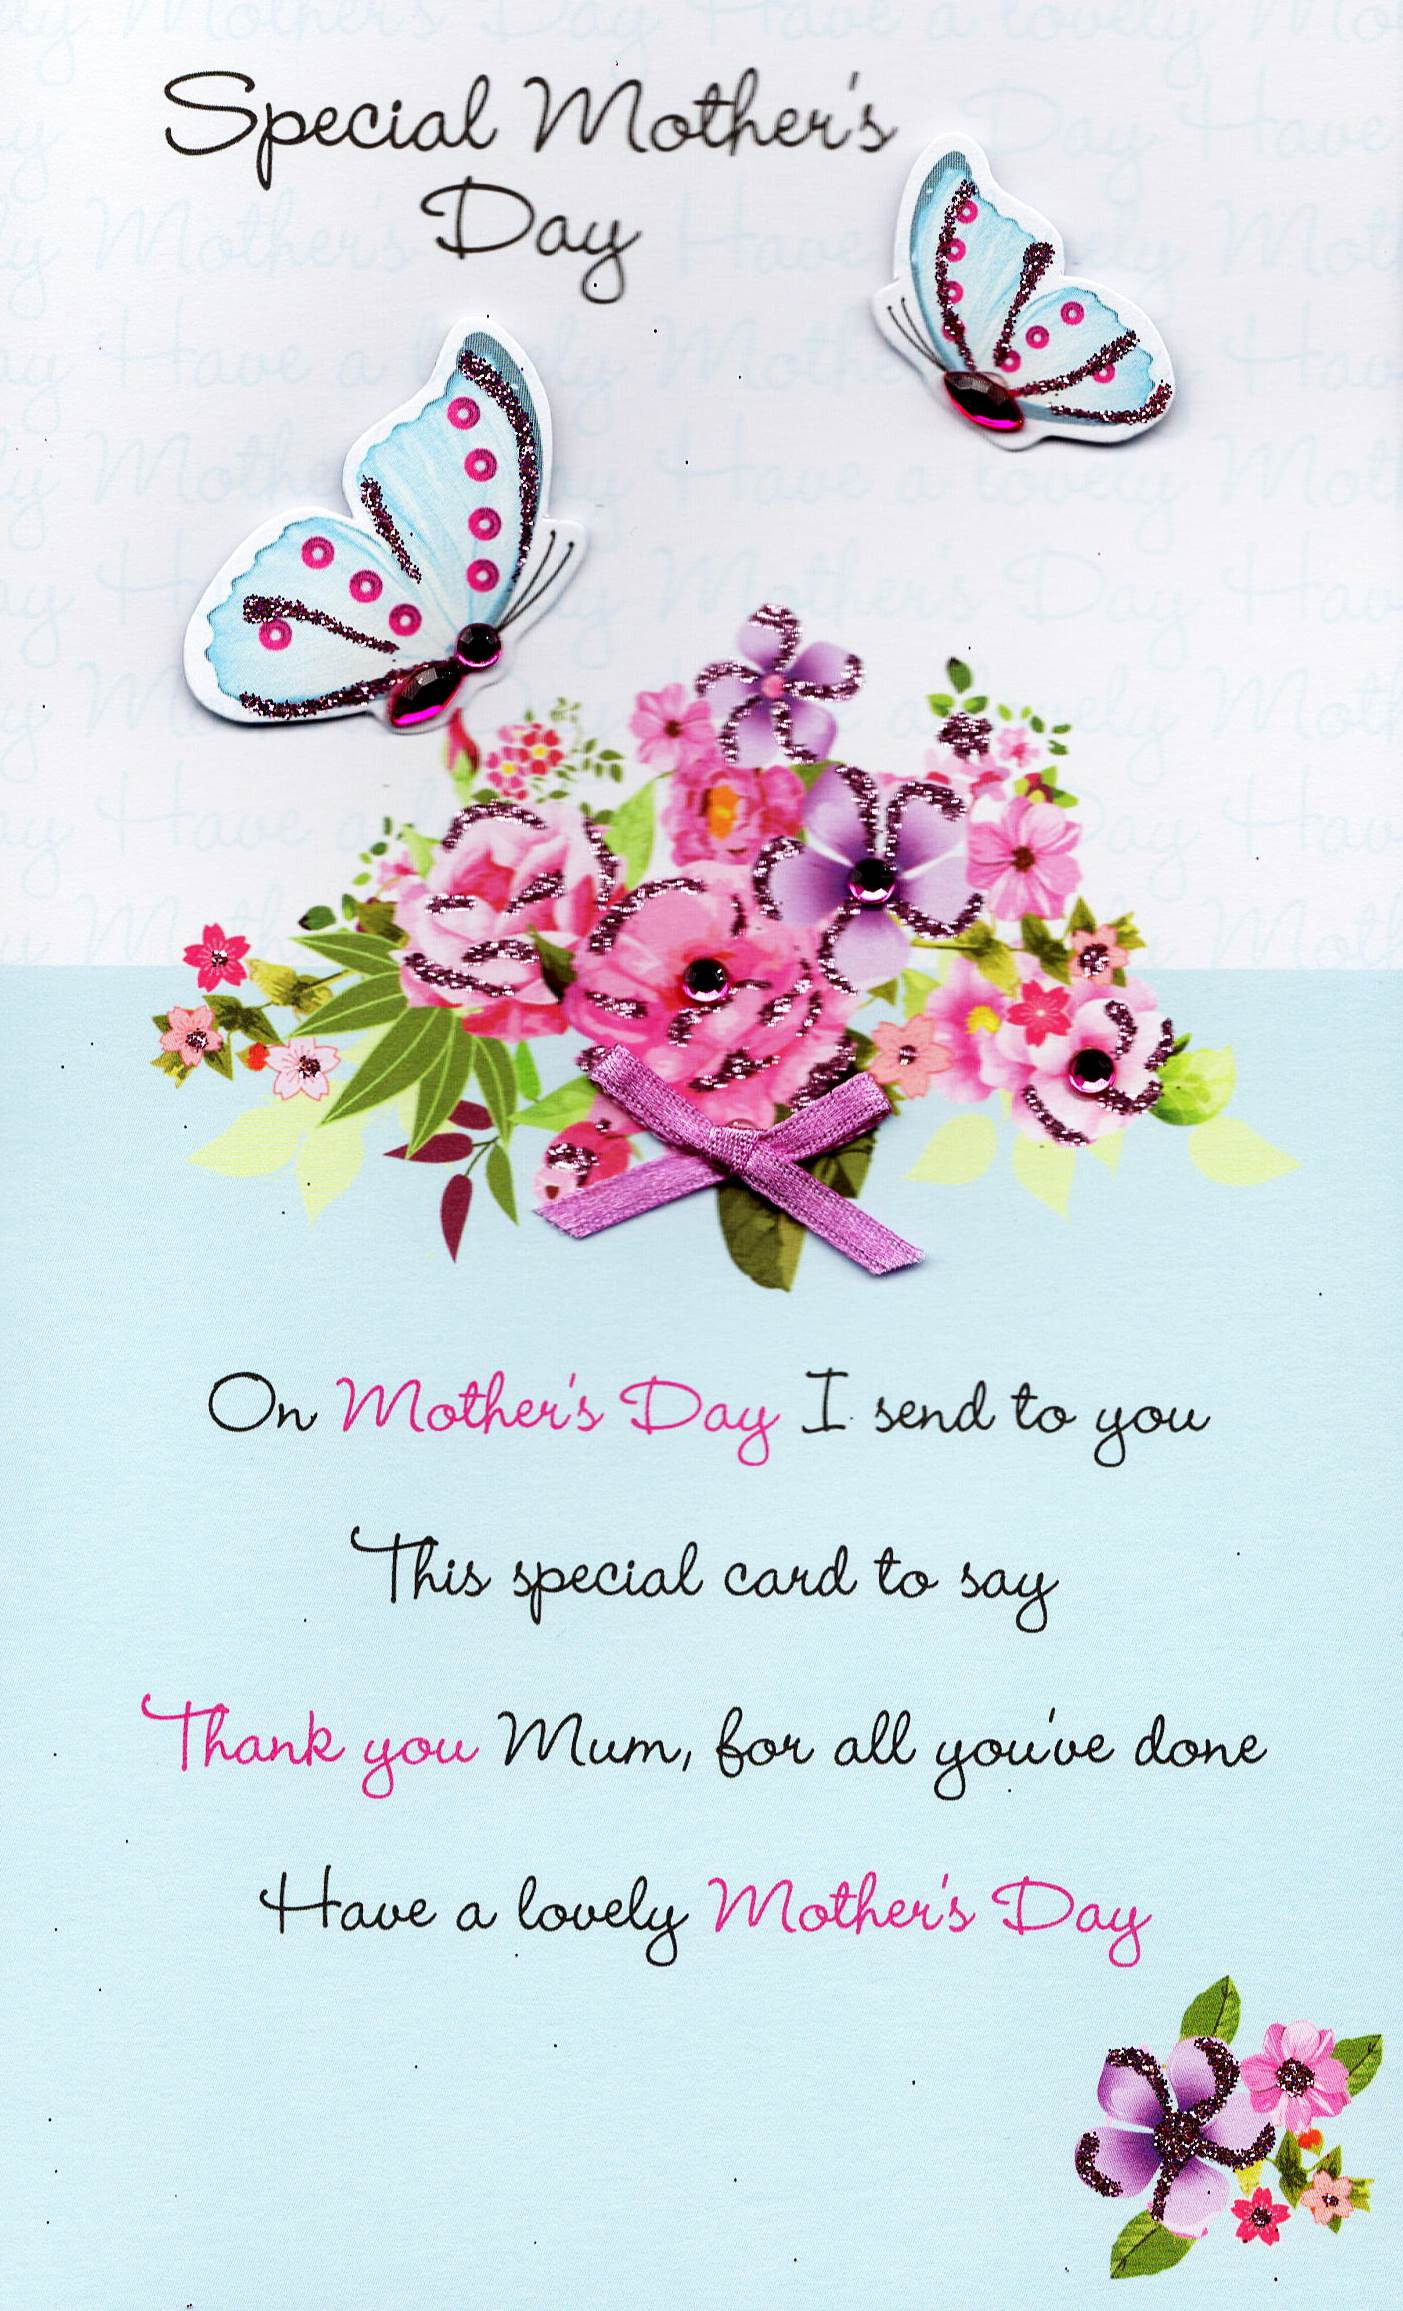 Mother's Day Photo Ideas
 Luxury Thank You Mum Hand Finished Mother s Day Card